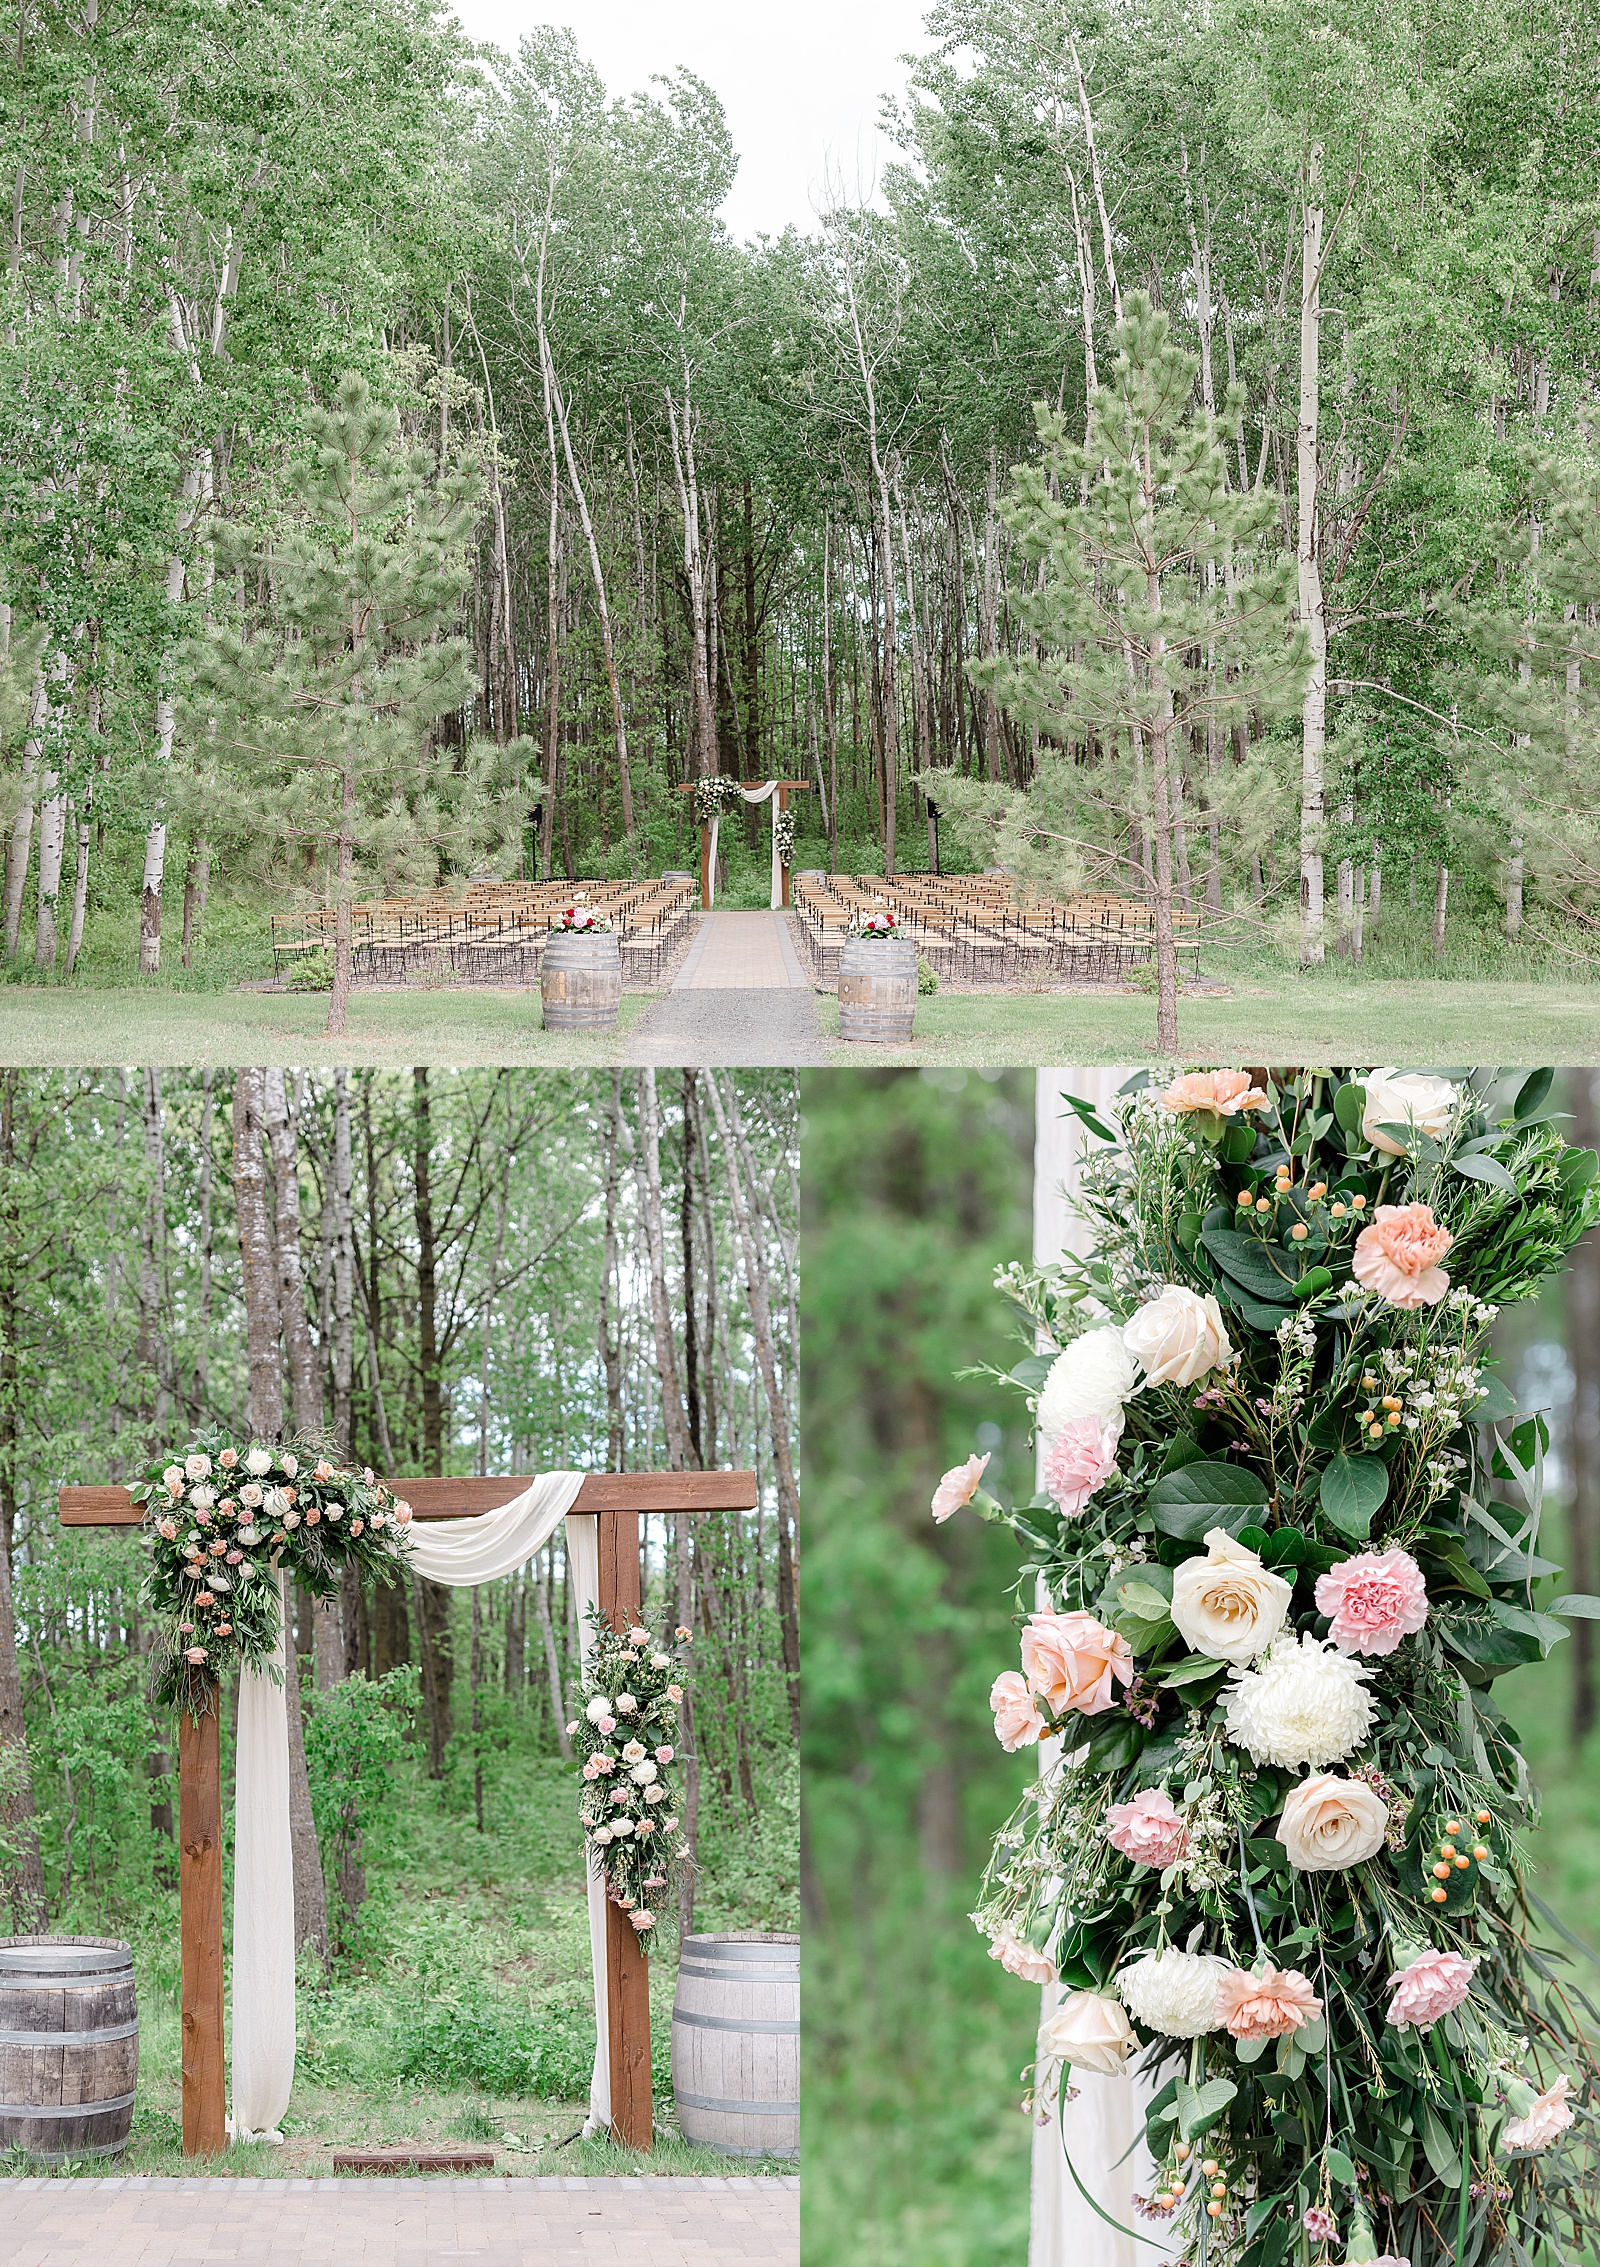 Ceremony space set up outside in the forest at Bluebelle Events venue